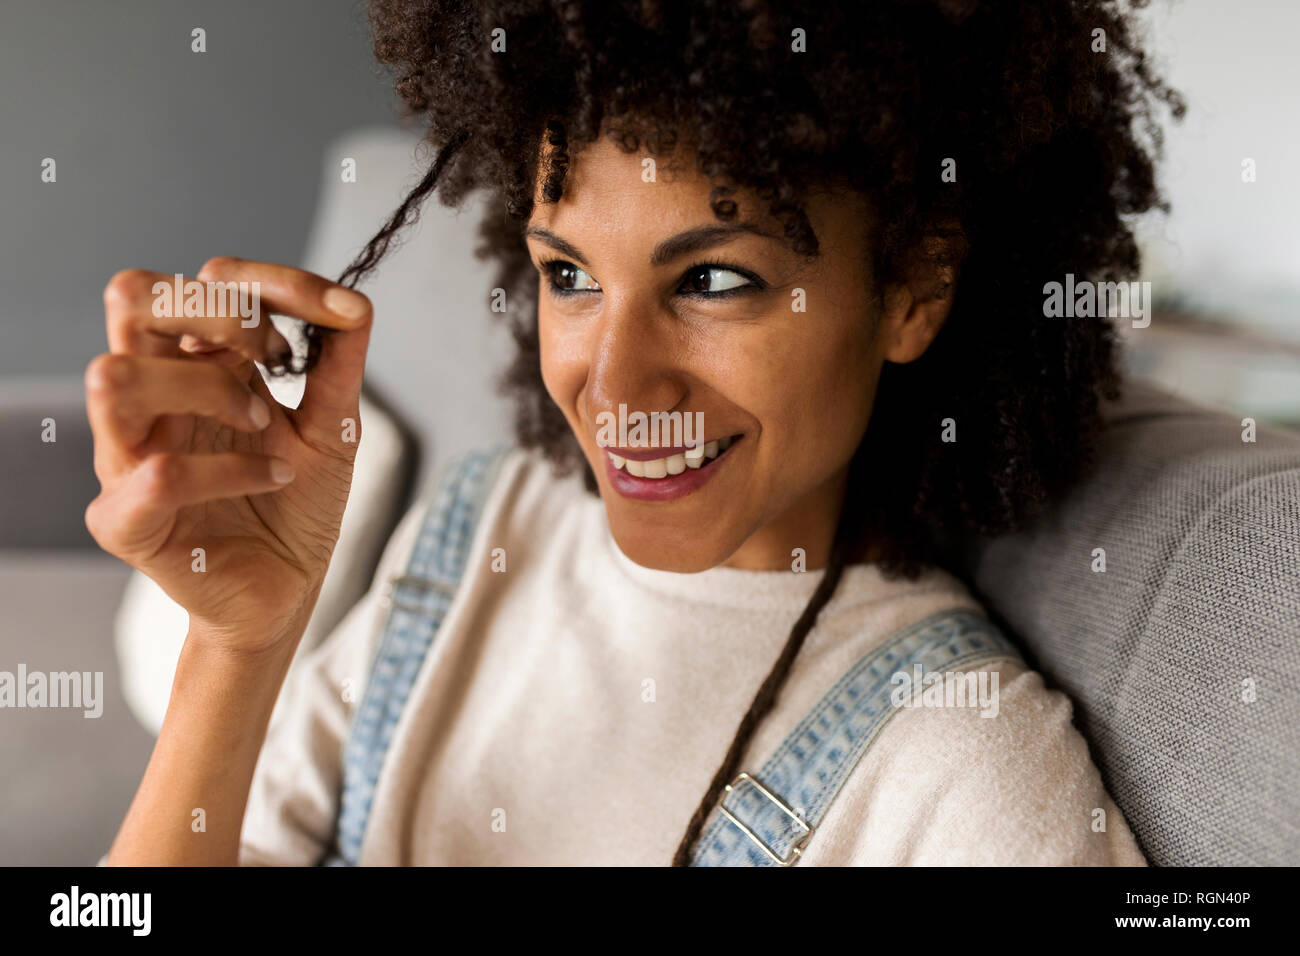 Portrait of smiling woman sitting on couch à examiner ses cheveux Banque D'Images